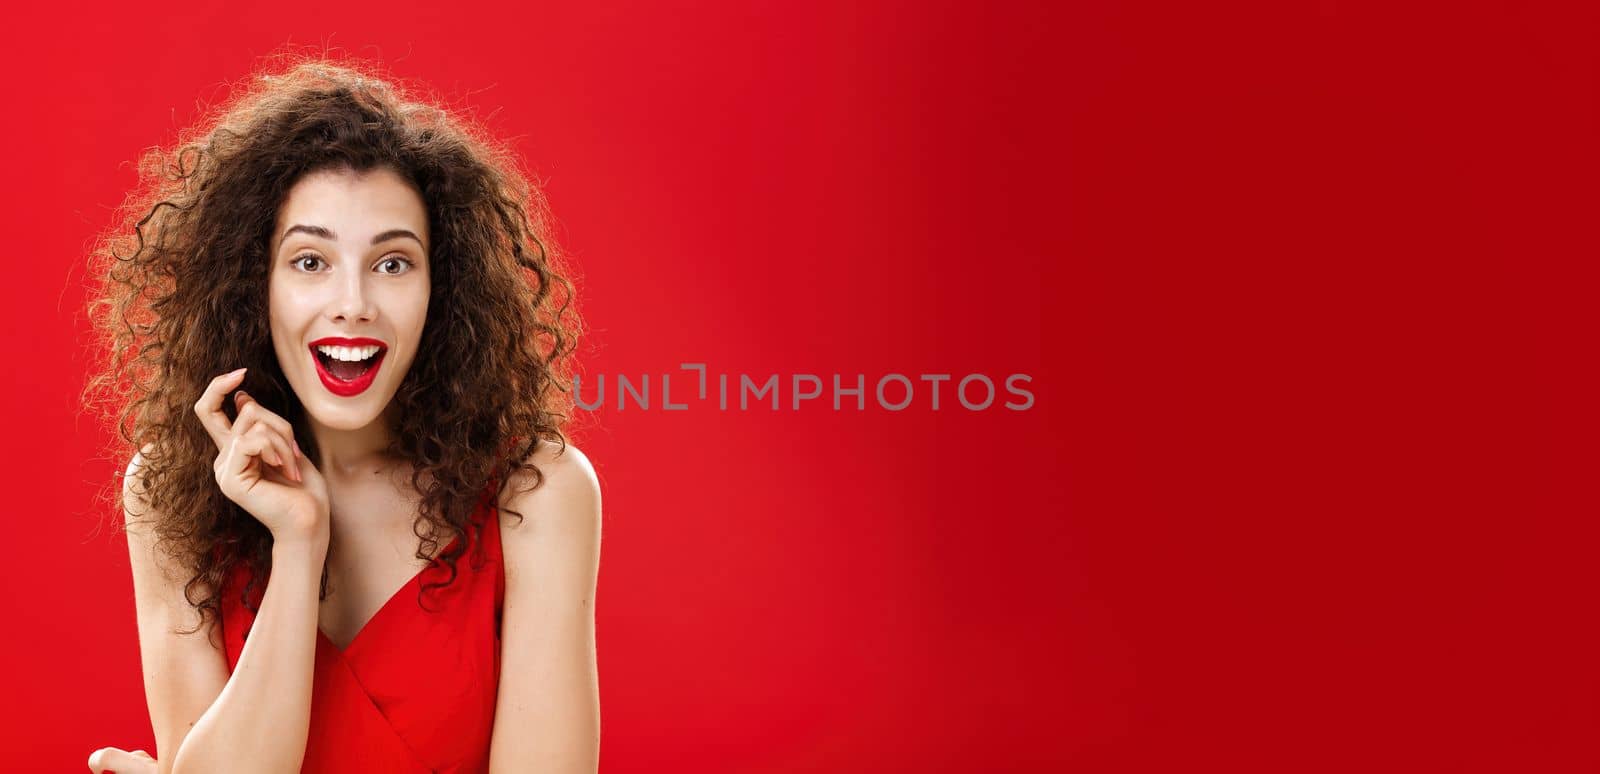 Impressed and excited feminine adult woman with curly hair in red lipstic and elegant evening dress gasping and smiling with surprised, amazed look playing with hair strand listening carefully story by Benzoix